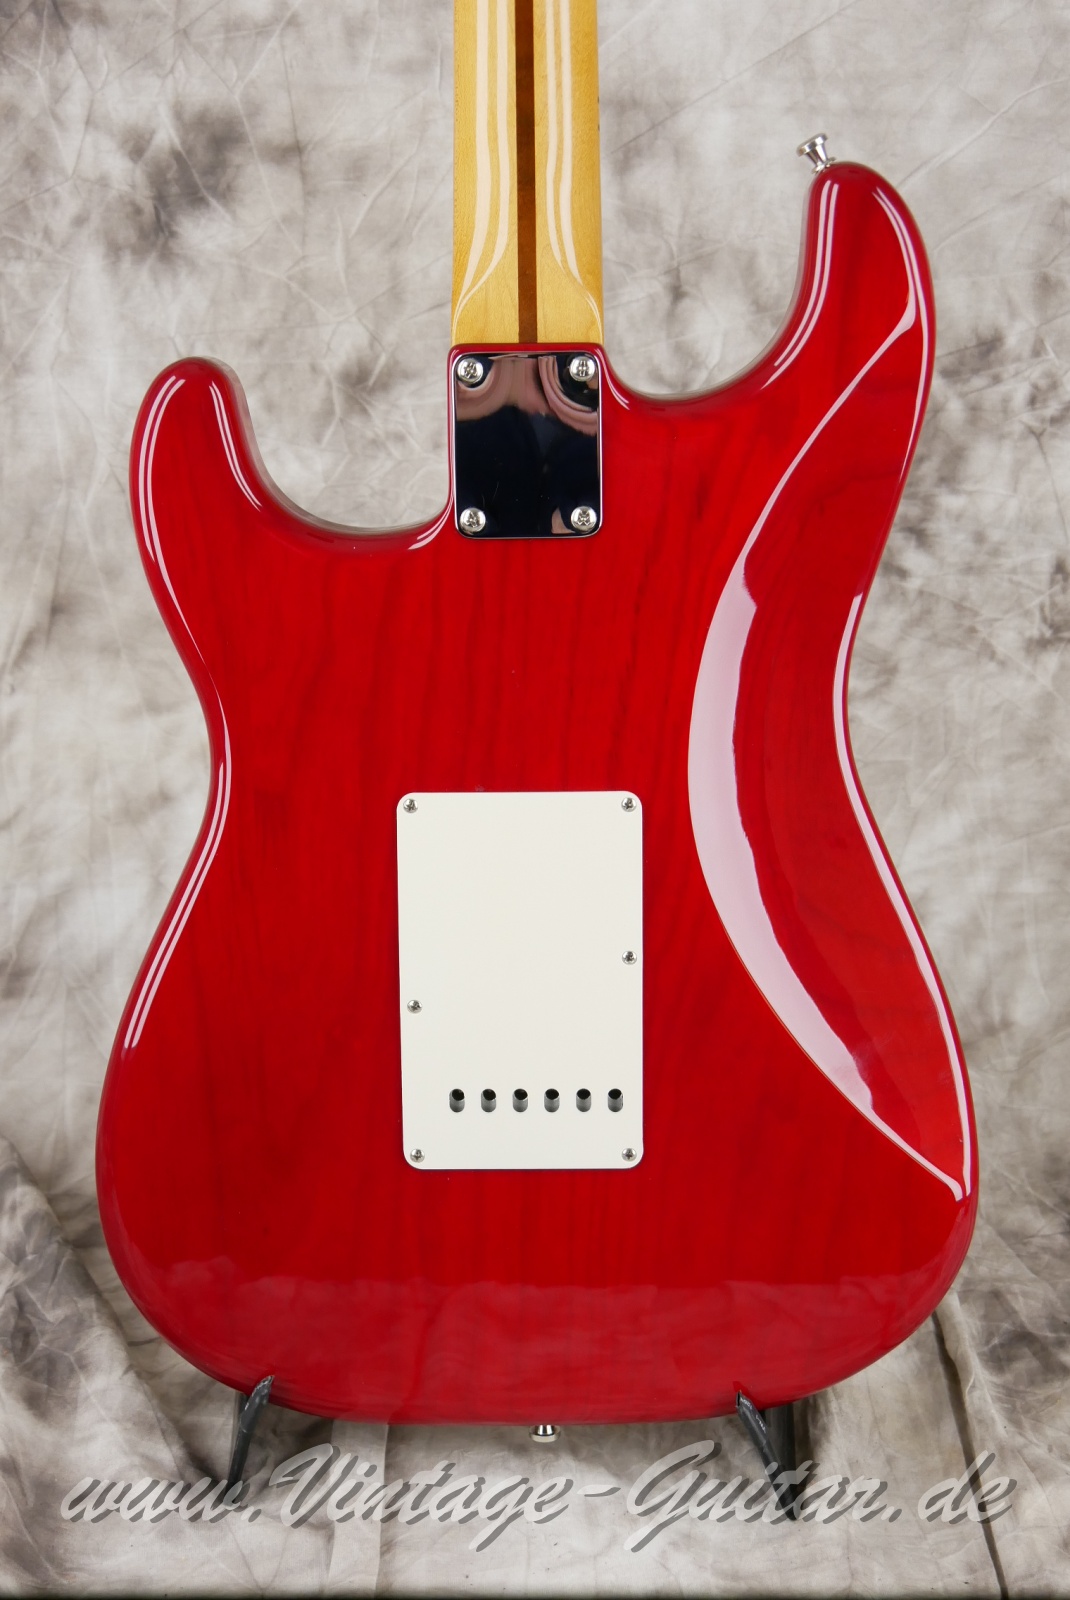 Fender_Stratocaster_classic_50s_Mexico_transparent_red_2010-006.JPG